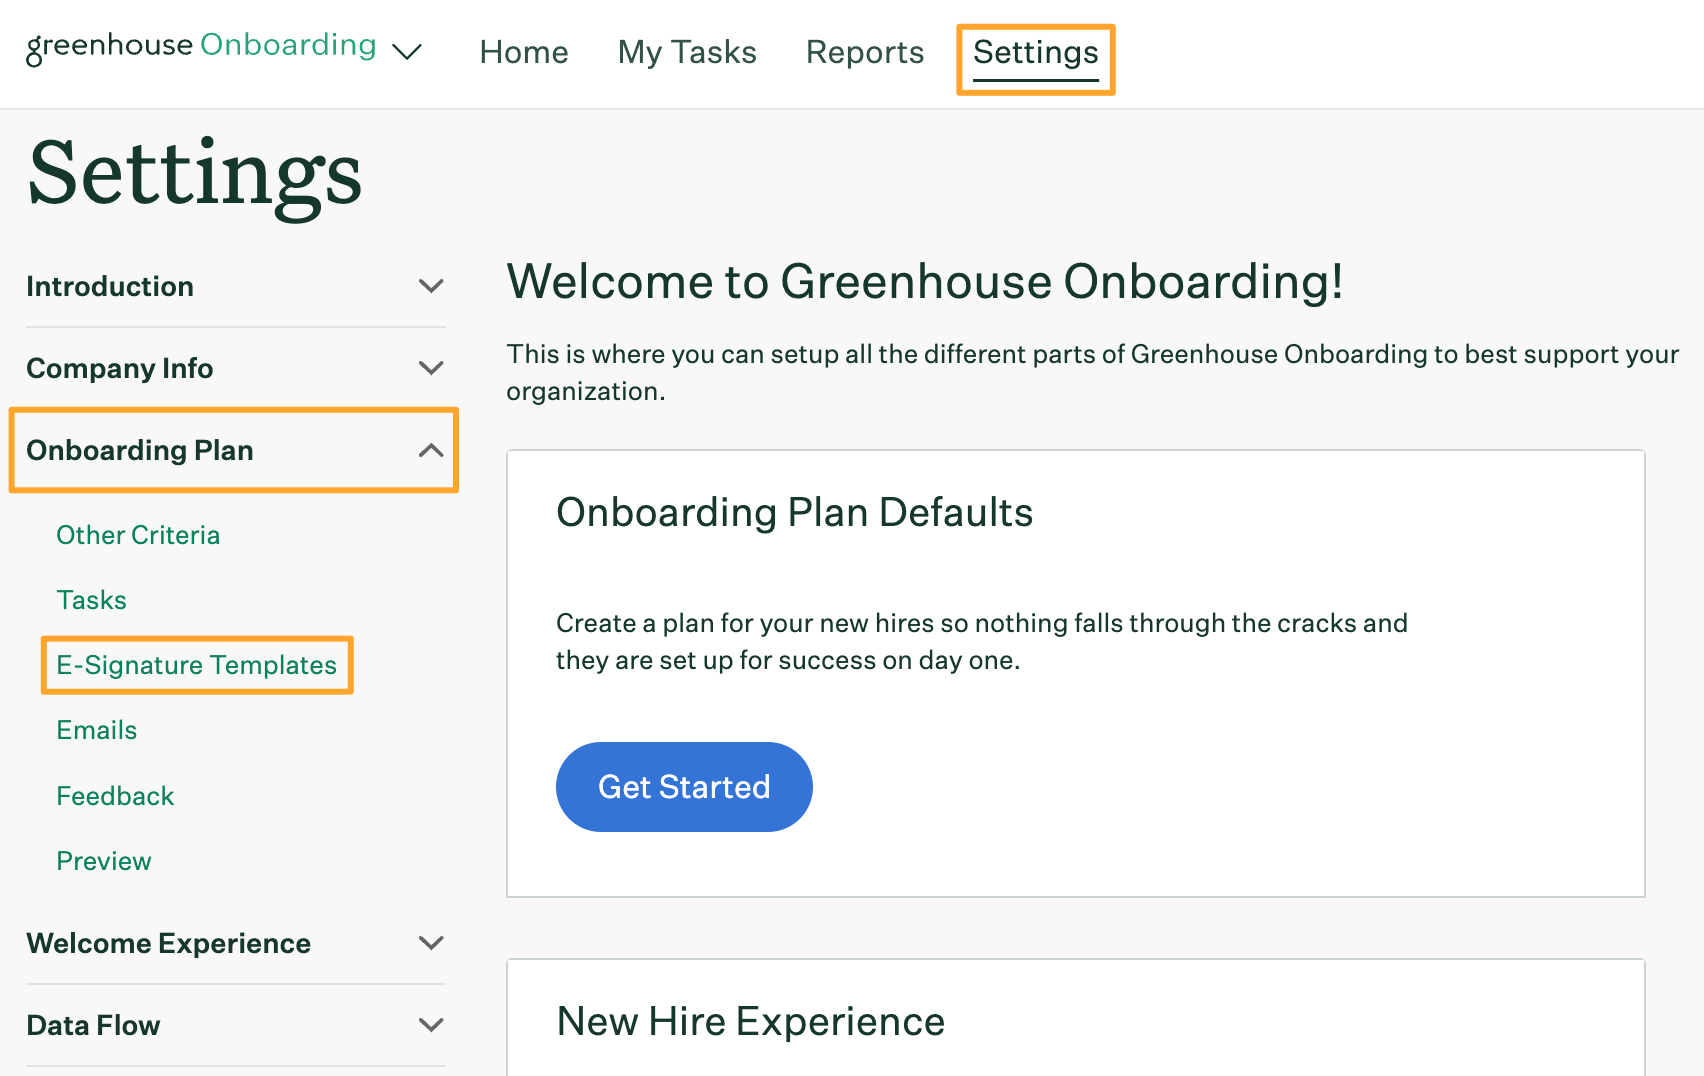 Greenhouse Onboarding Settings page with navigation steps highlighted